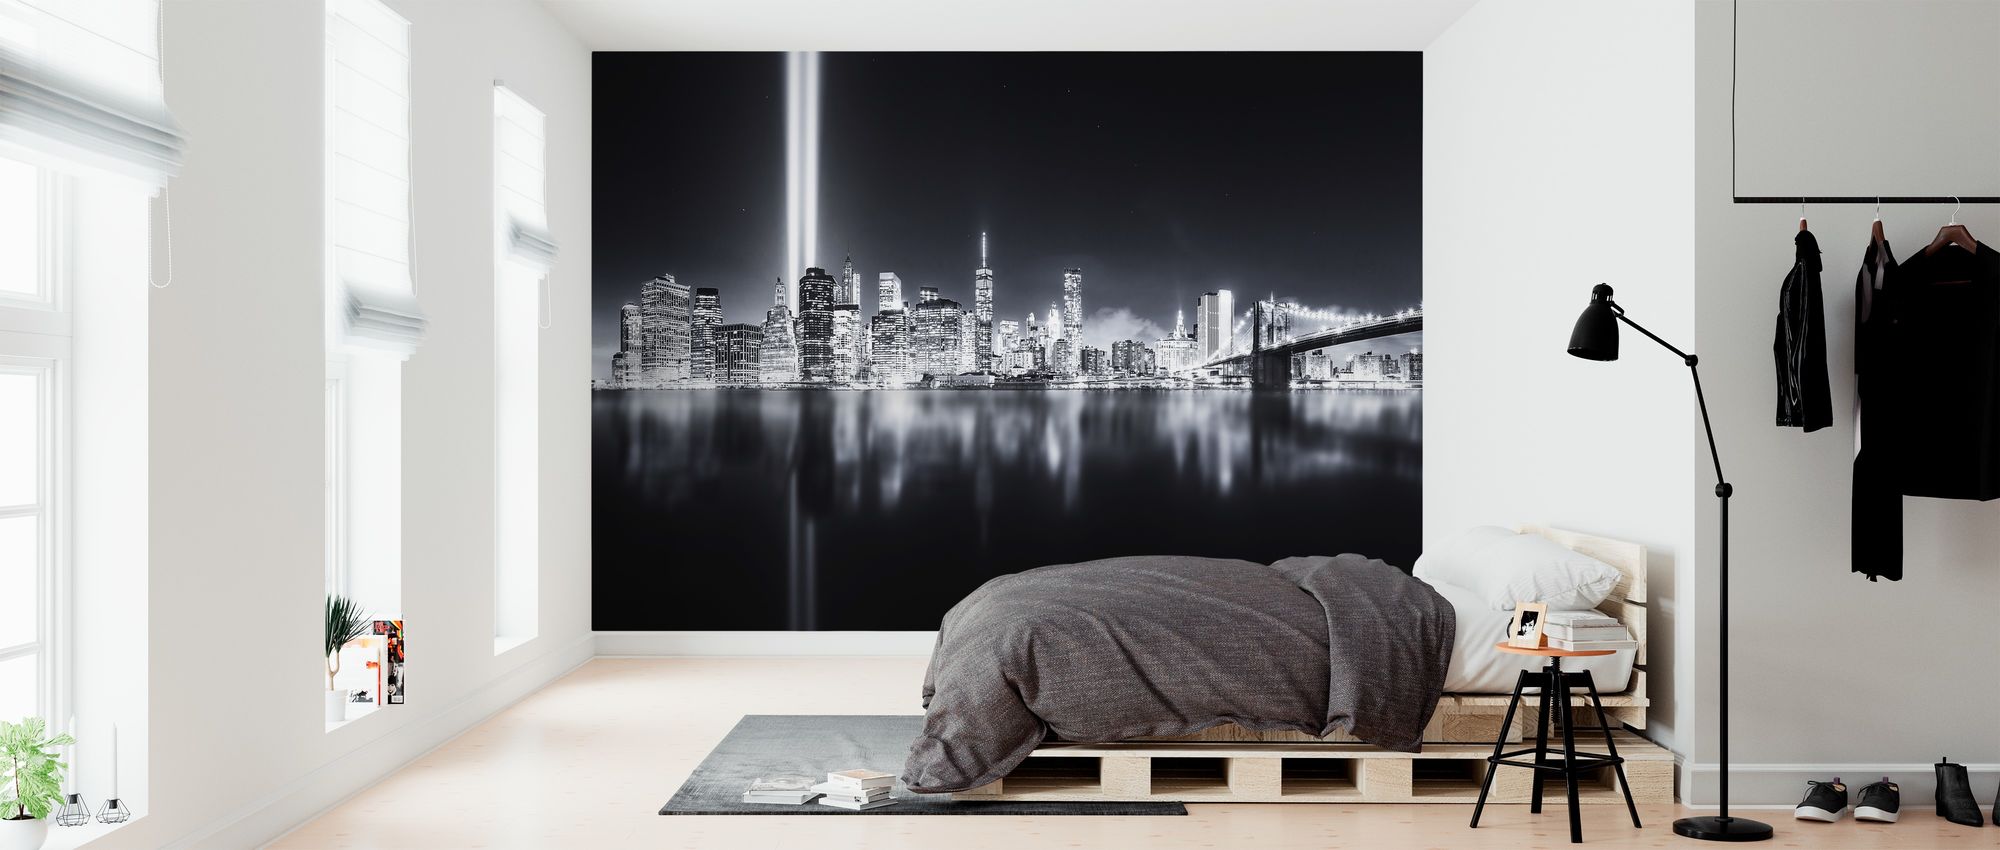 Unforgettable 11b High Quality Wall Murals With Us